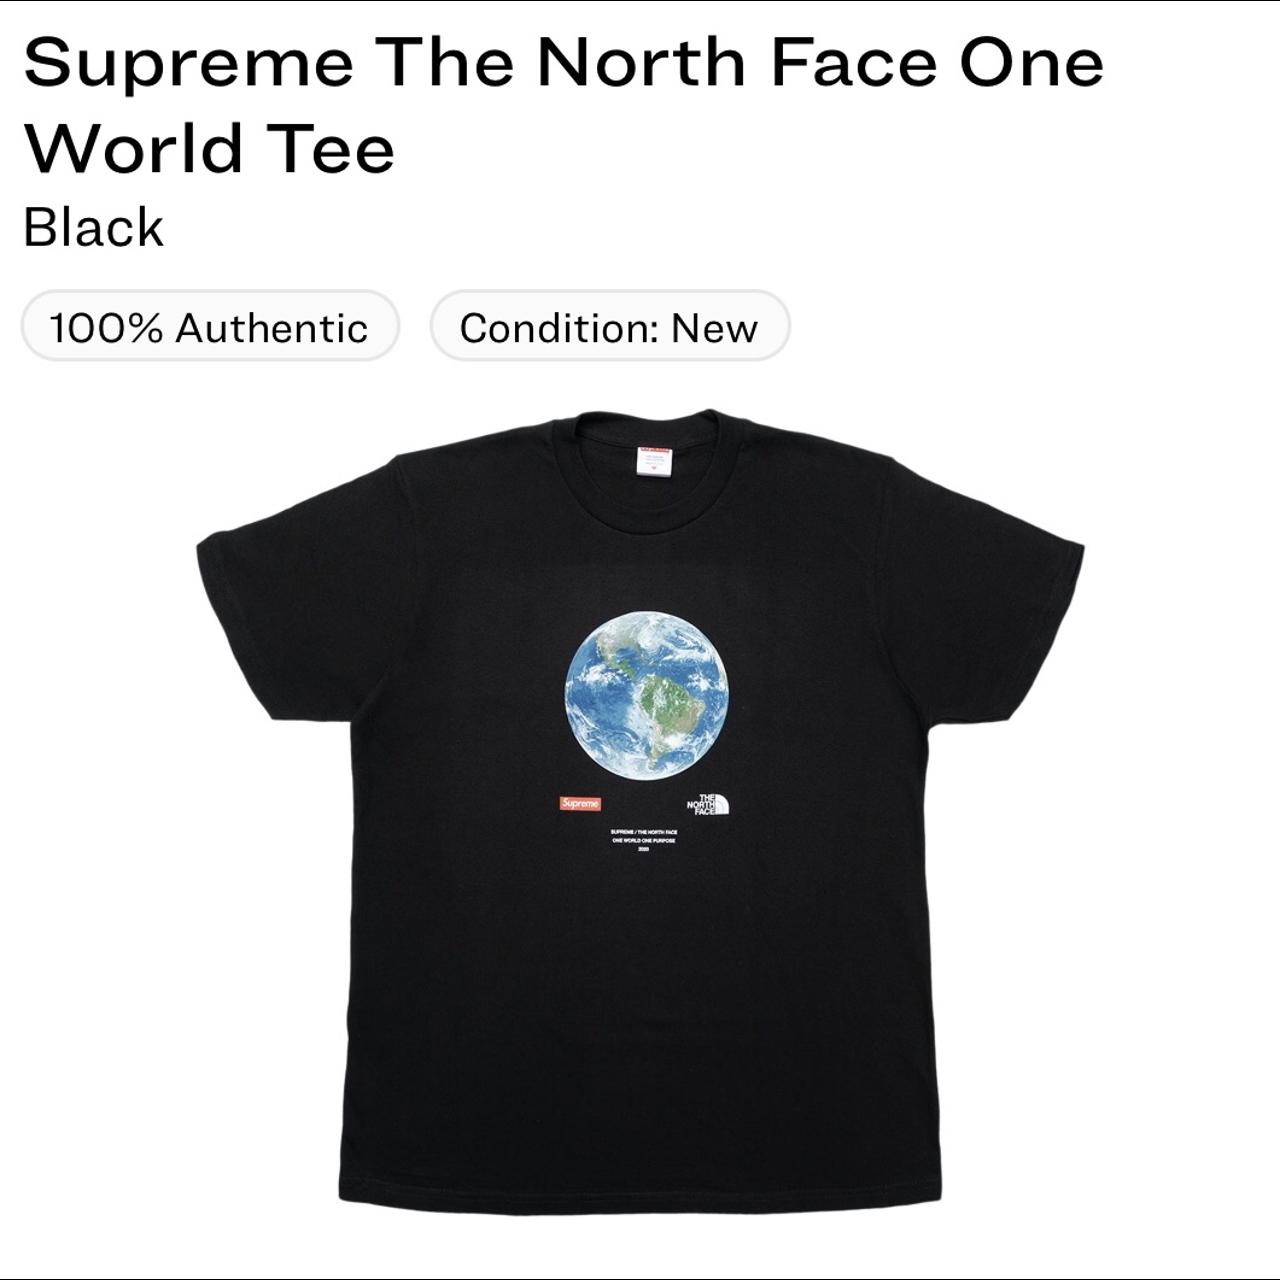 Supreme x the north face One world tee , Size M, Brand...